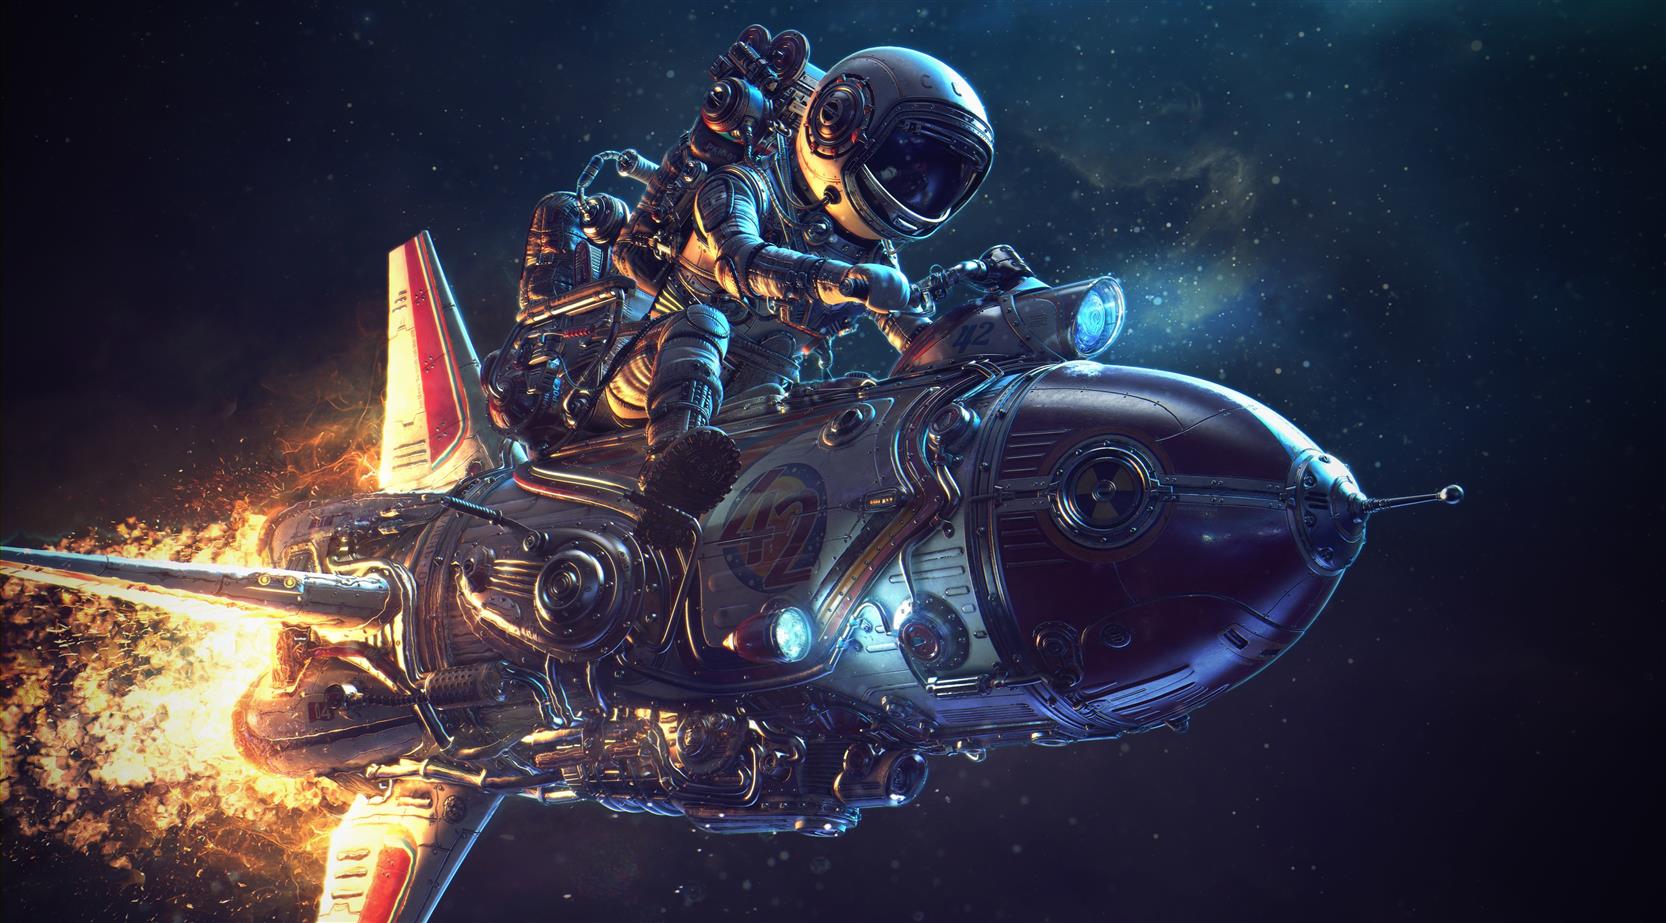 spaceship illustration, astronaut riding on spacecraft on space, HD wallpaper